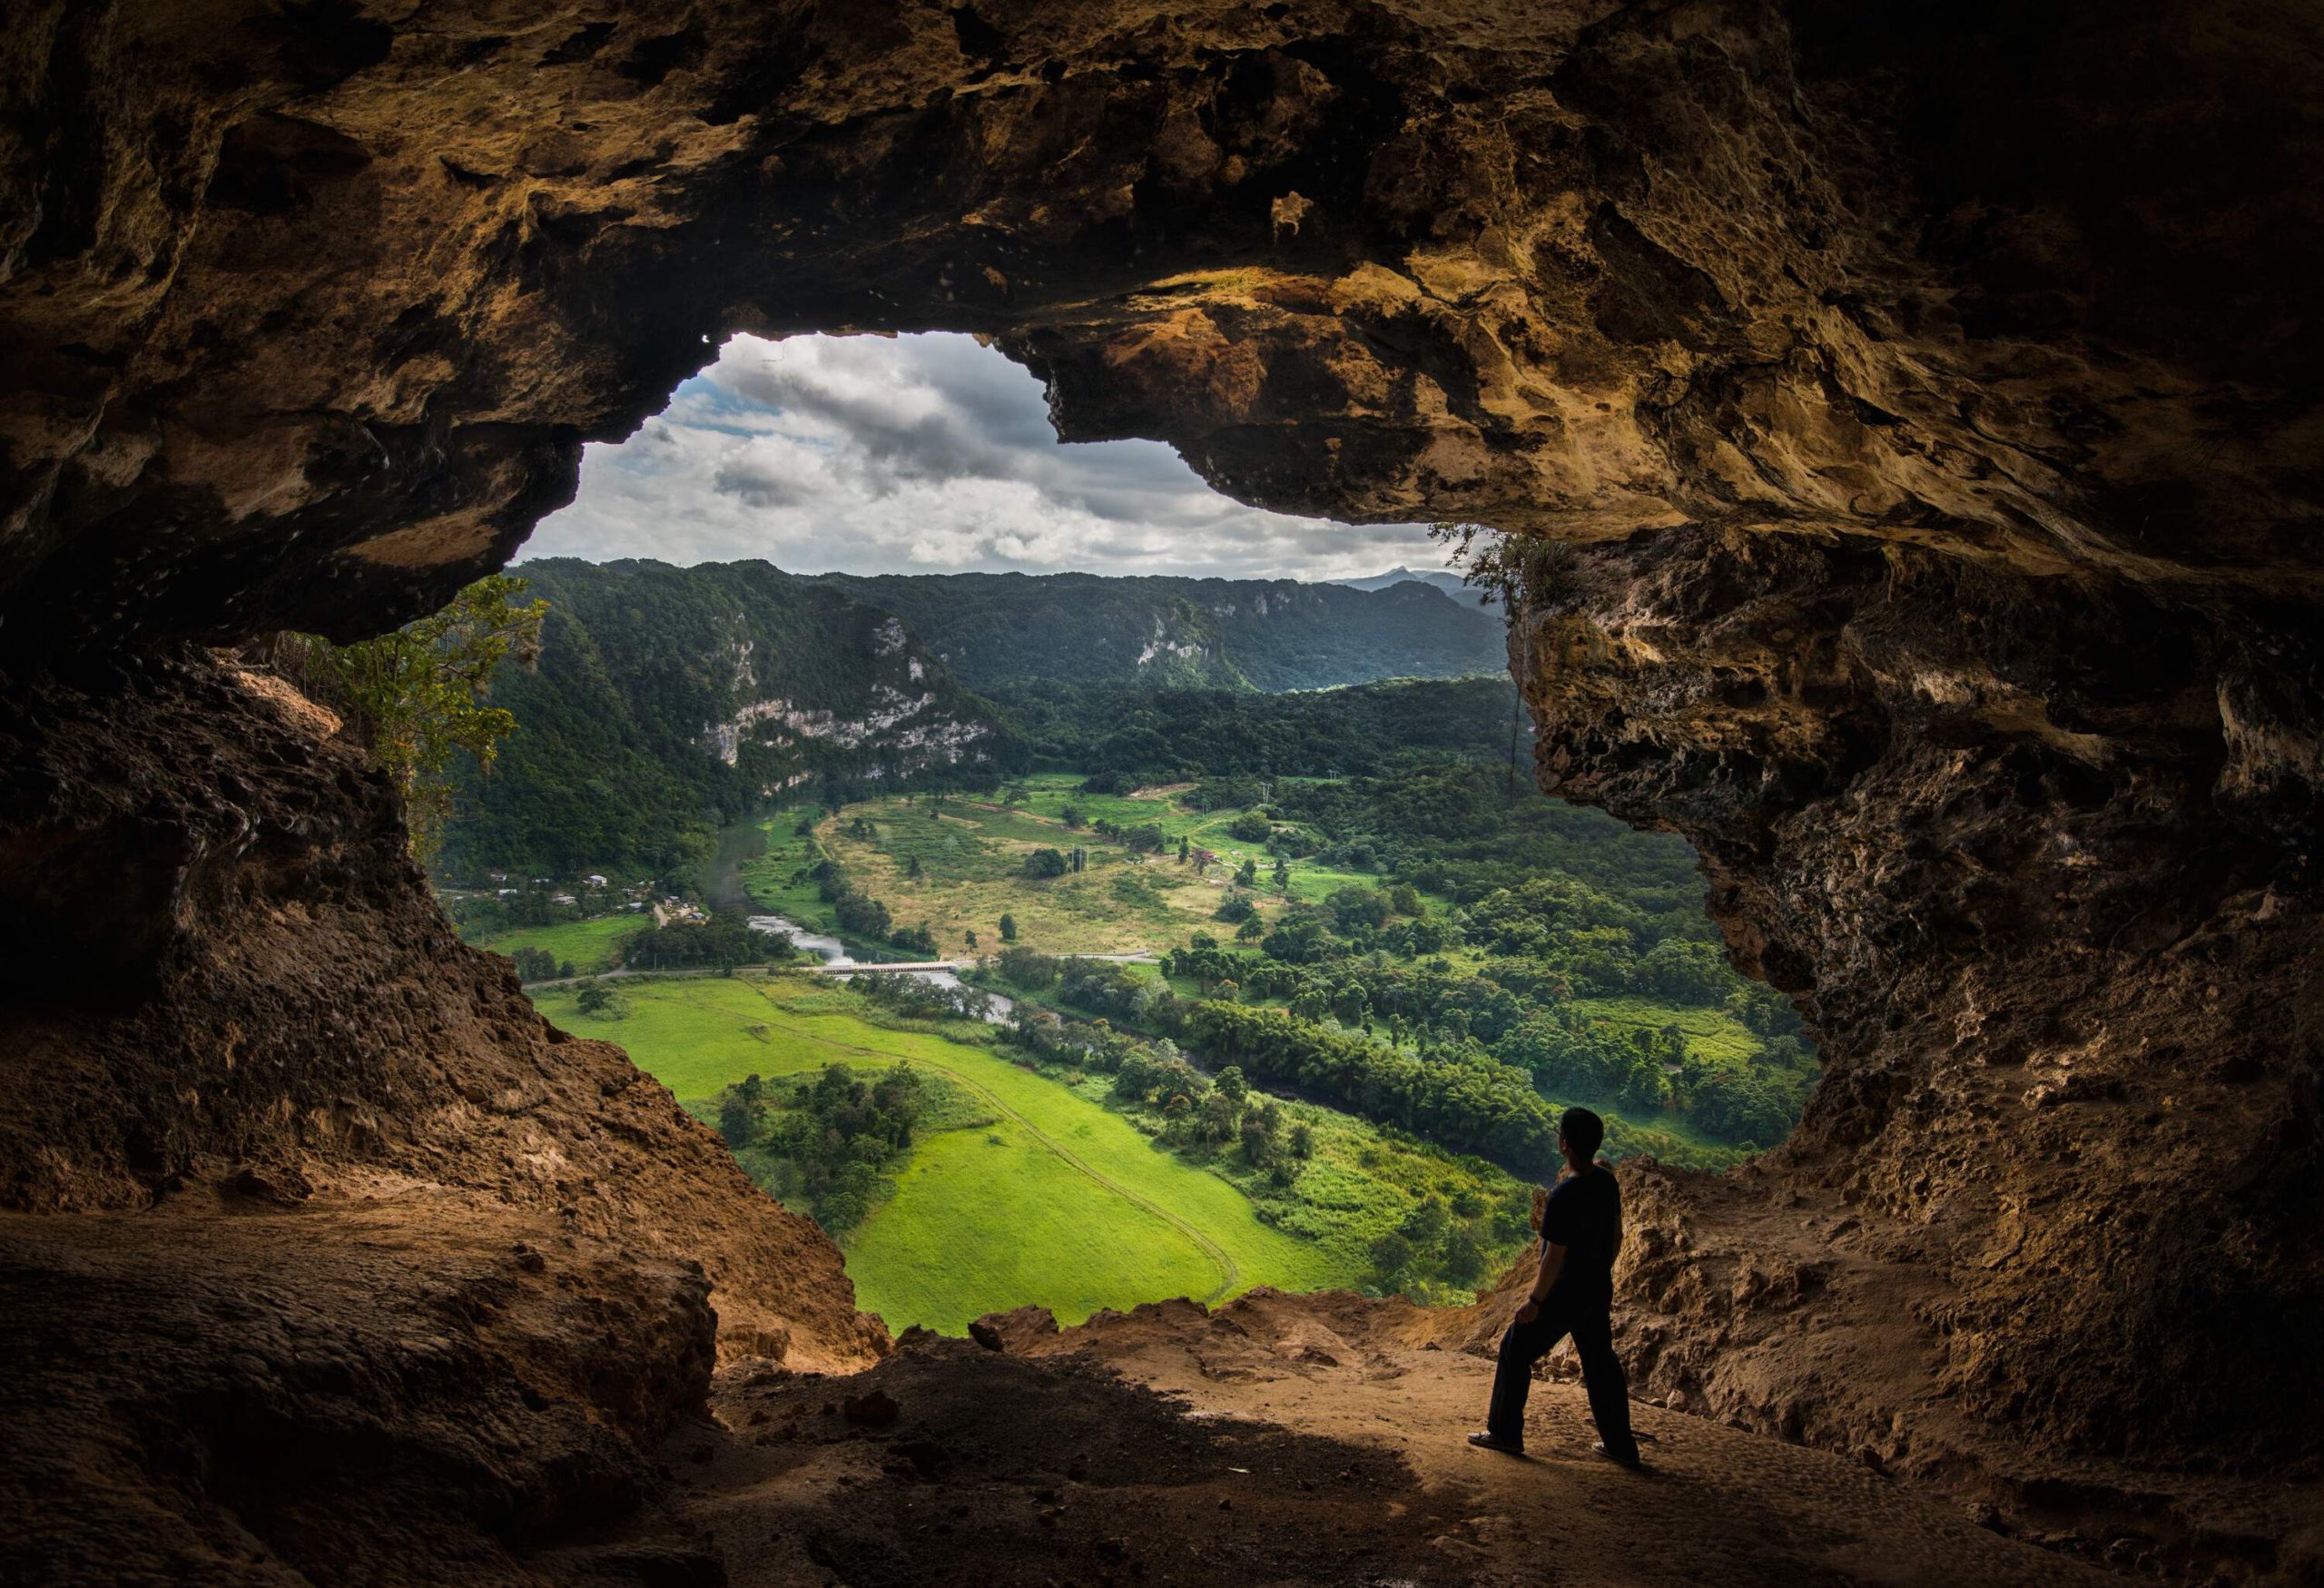 A person standing near the opening of a cave looking out into a lush grassland and trees.